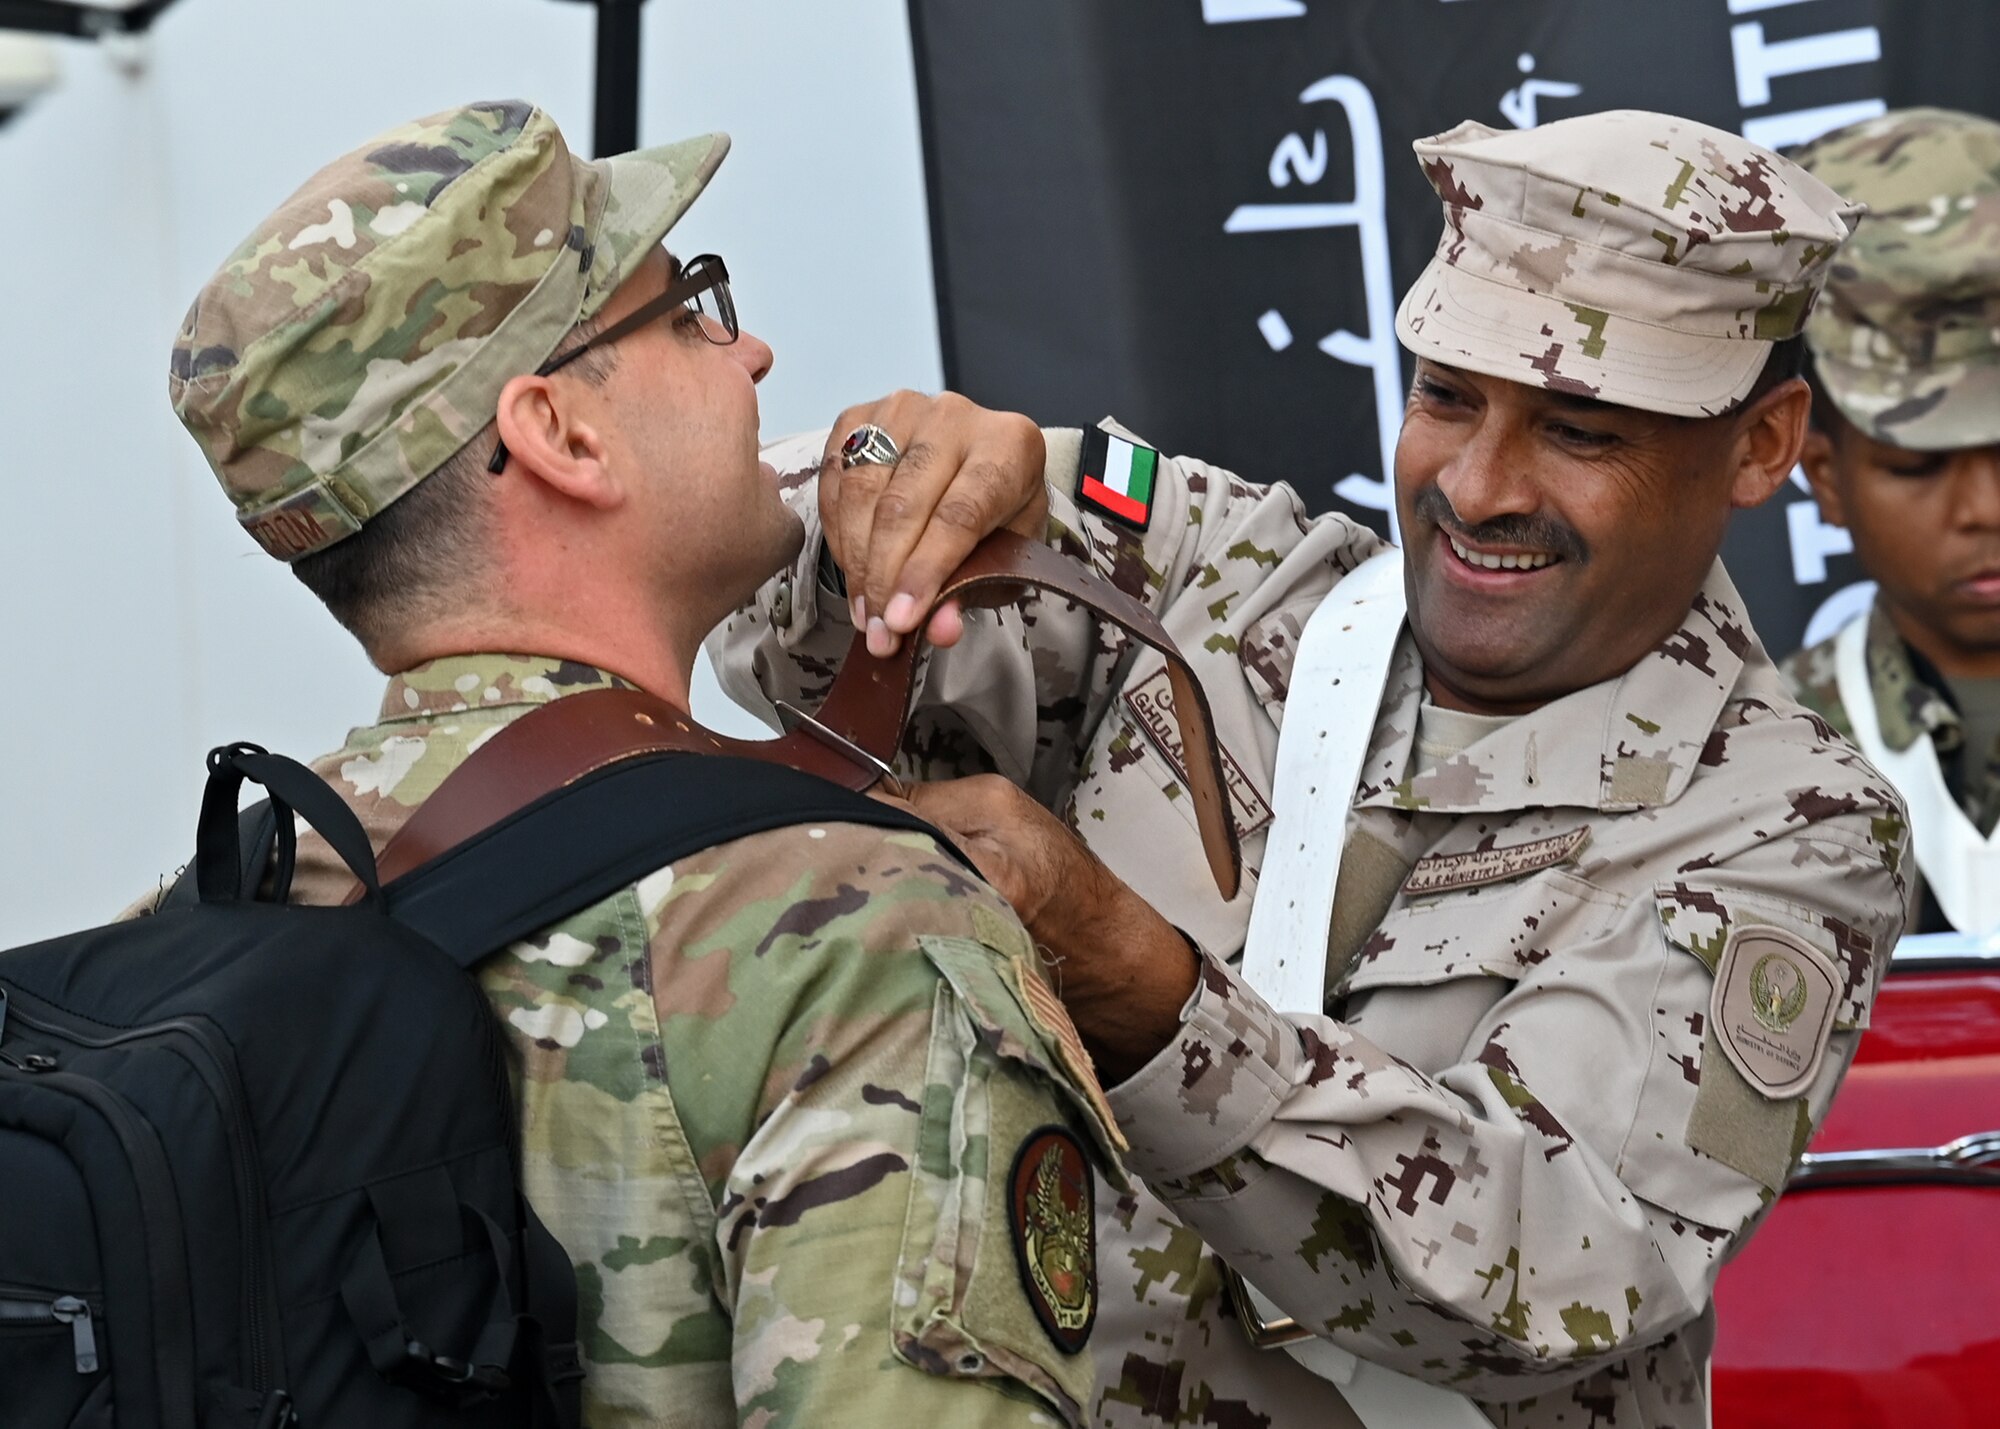 US and UAE band service members interact.